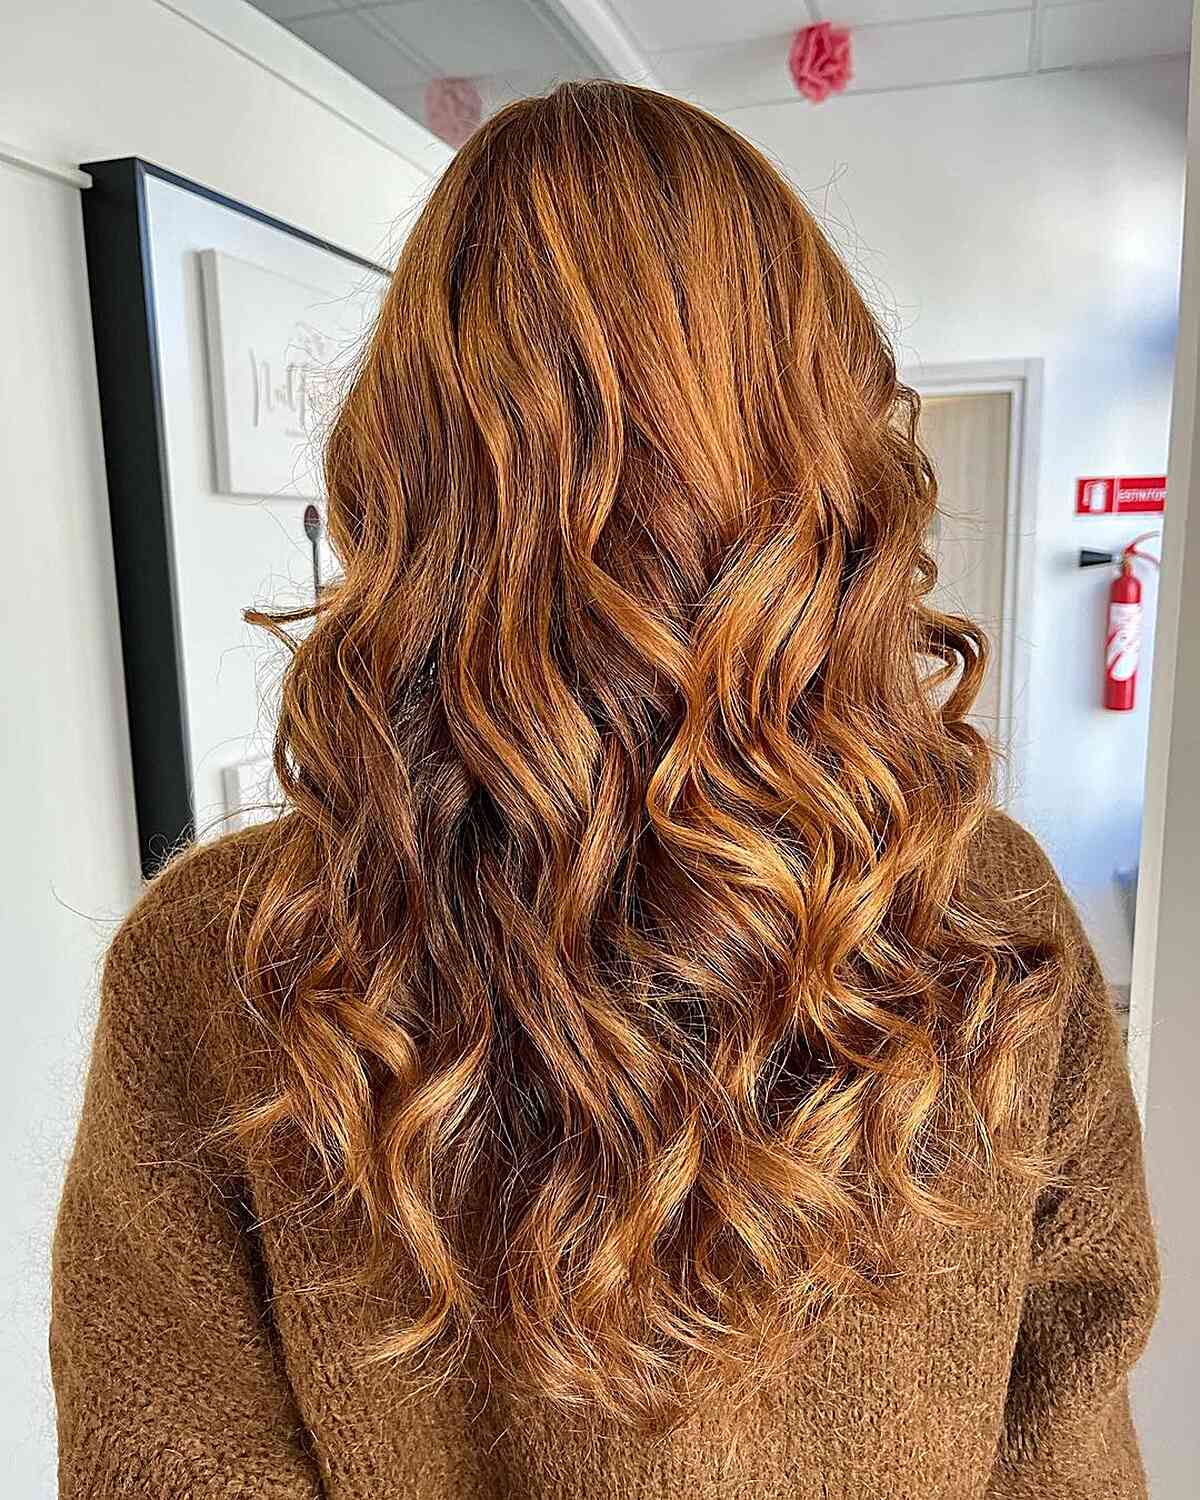 Hints of Red and Brown Hair Color Blend